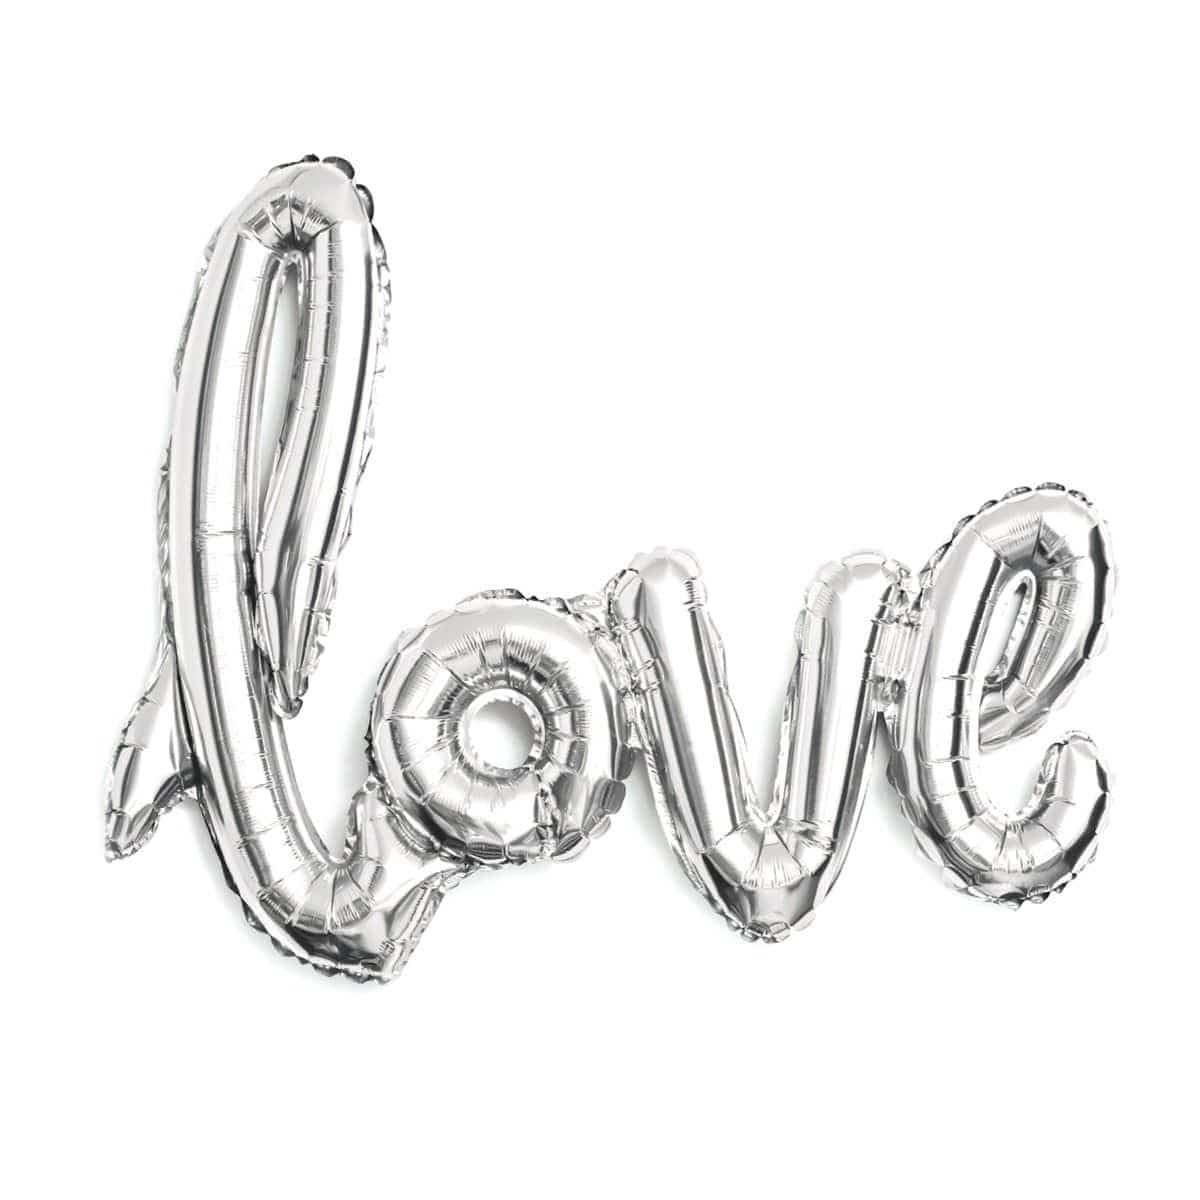 Buy Balloons Silver Love Air Filled Foil Balloon sold at Party Expert